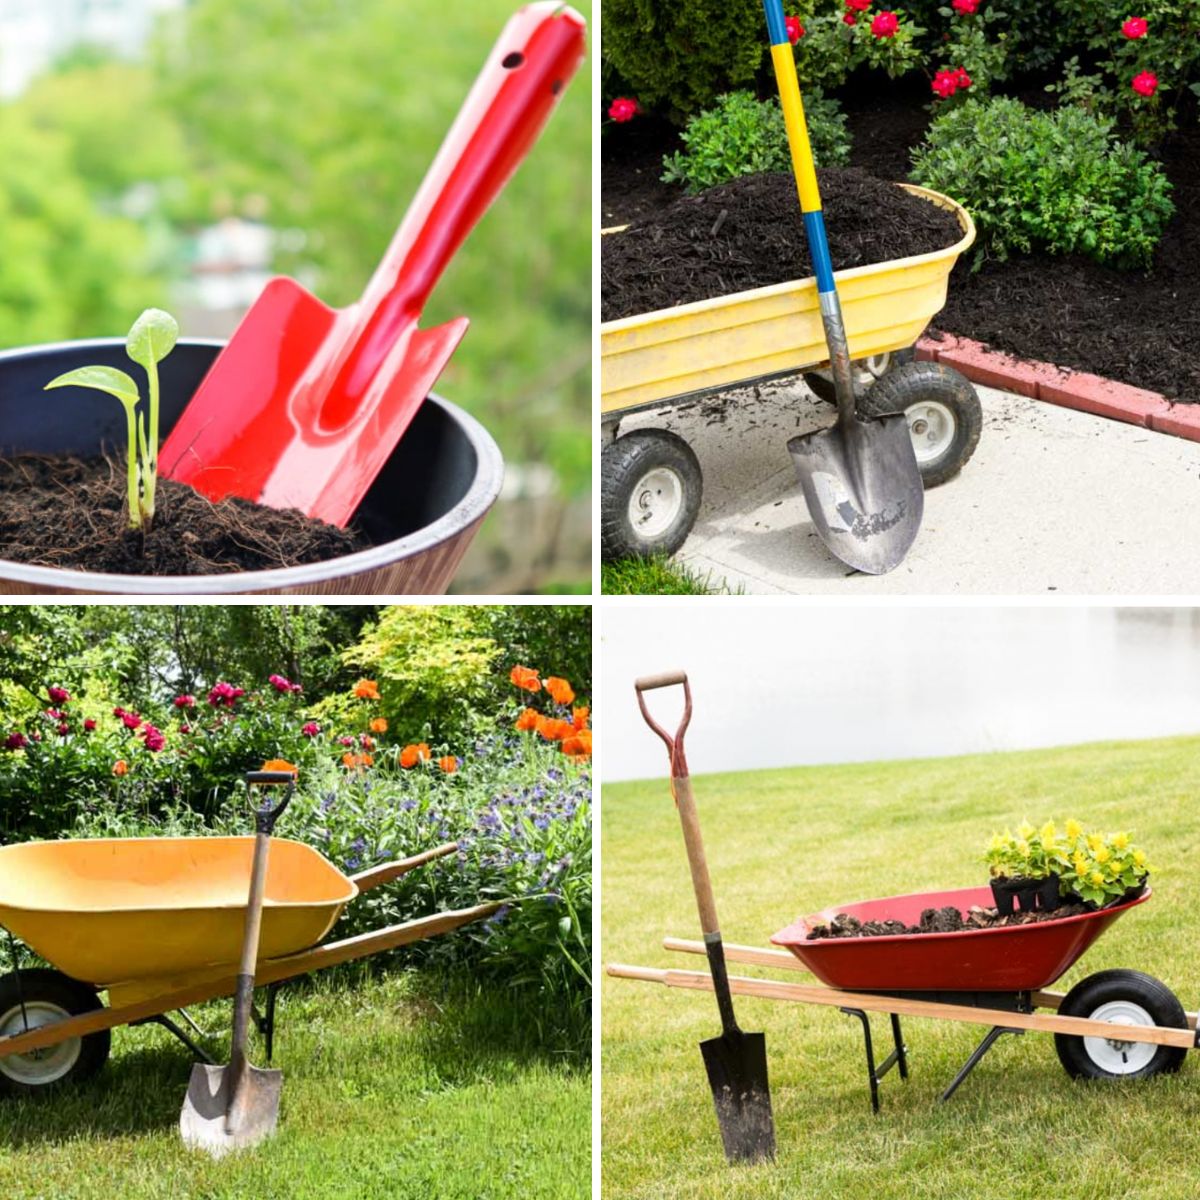 different types of shovels